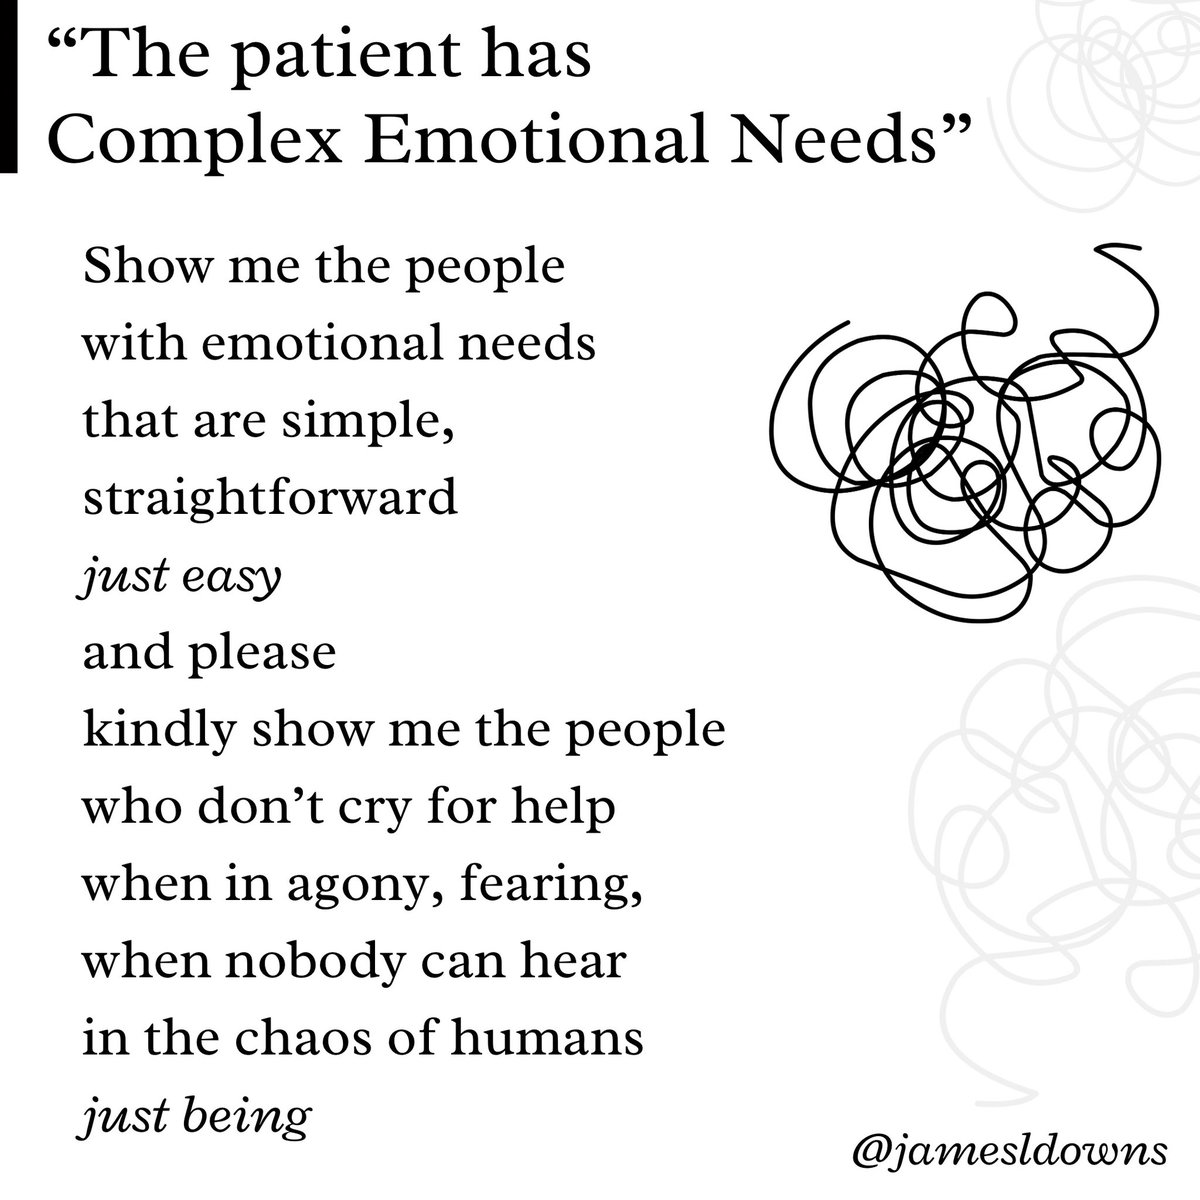 It’s Mental Health Awareness Week. Instead of offering some lighthearted feelgood message, here are some words for anyone who, like me, has ever been diagnosed as having “CoMPleX eMoTiONaL nEeDS” 👇🏽